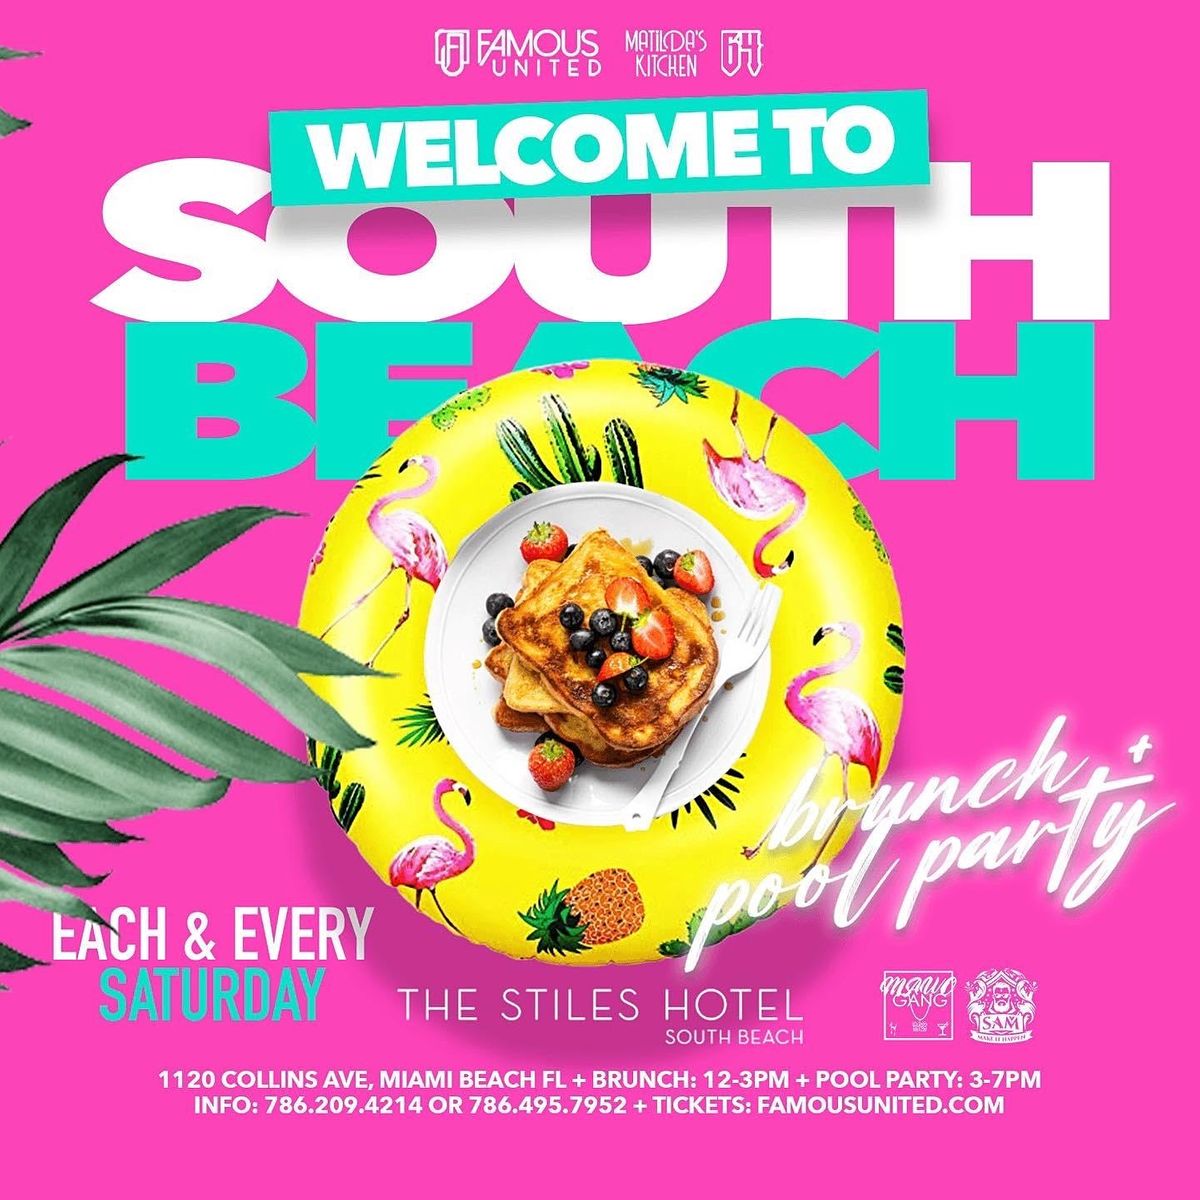 WELCOME TO SOUTH BEACH BRUNCH+POOLPARTY